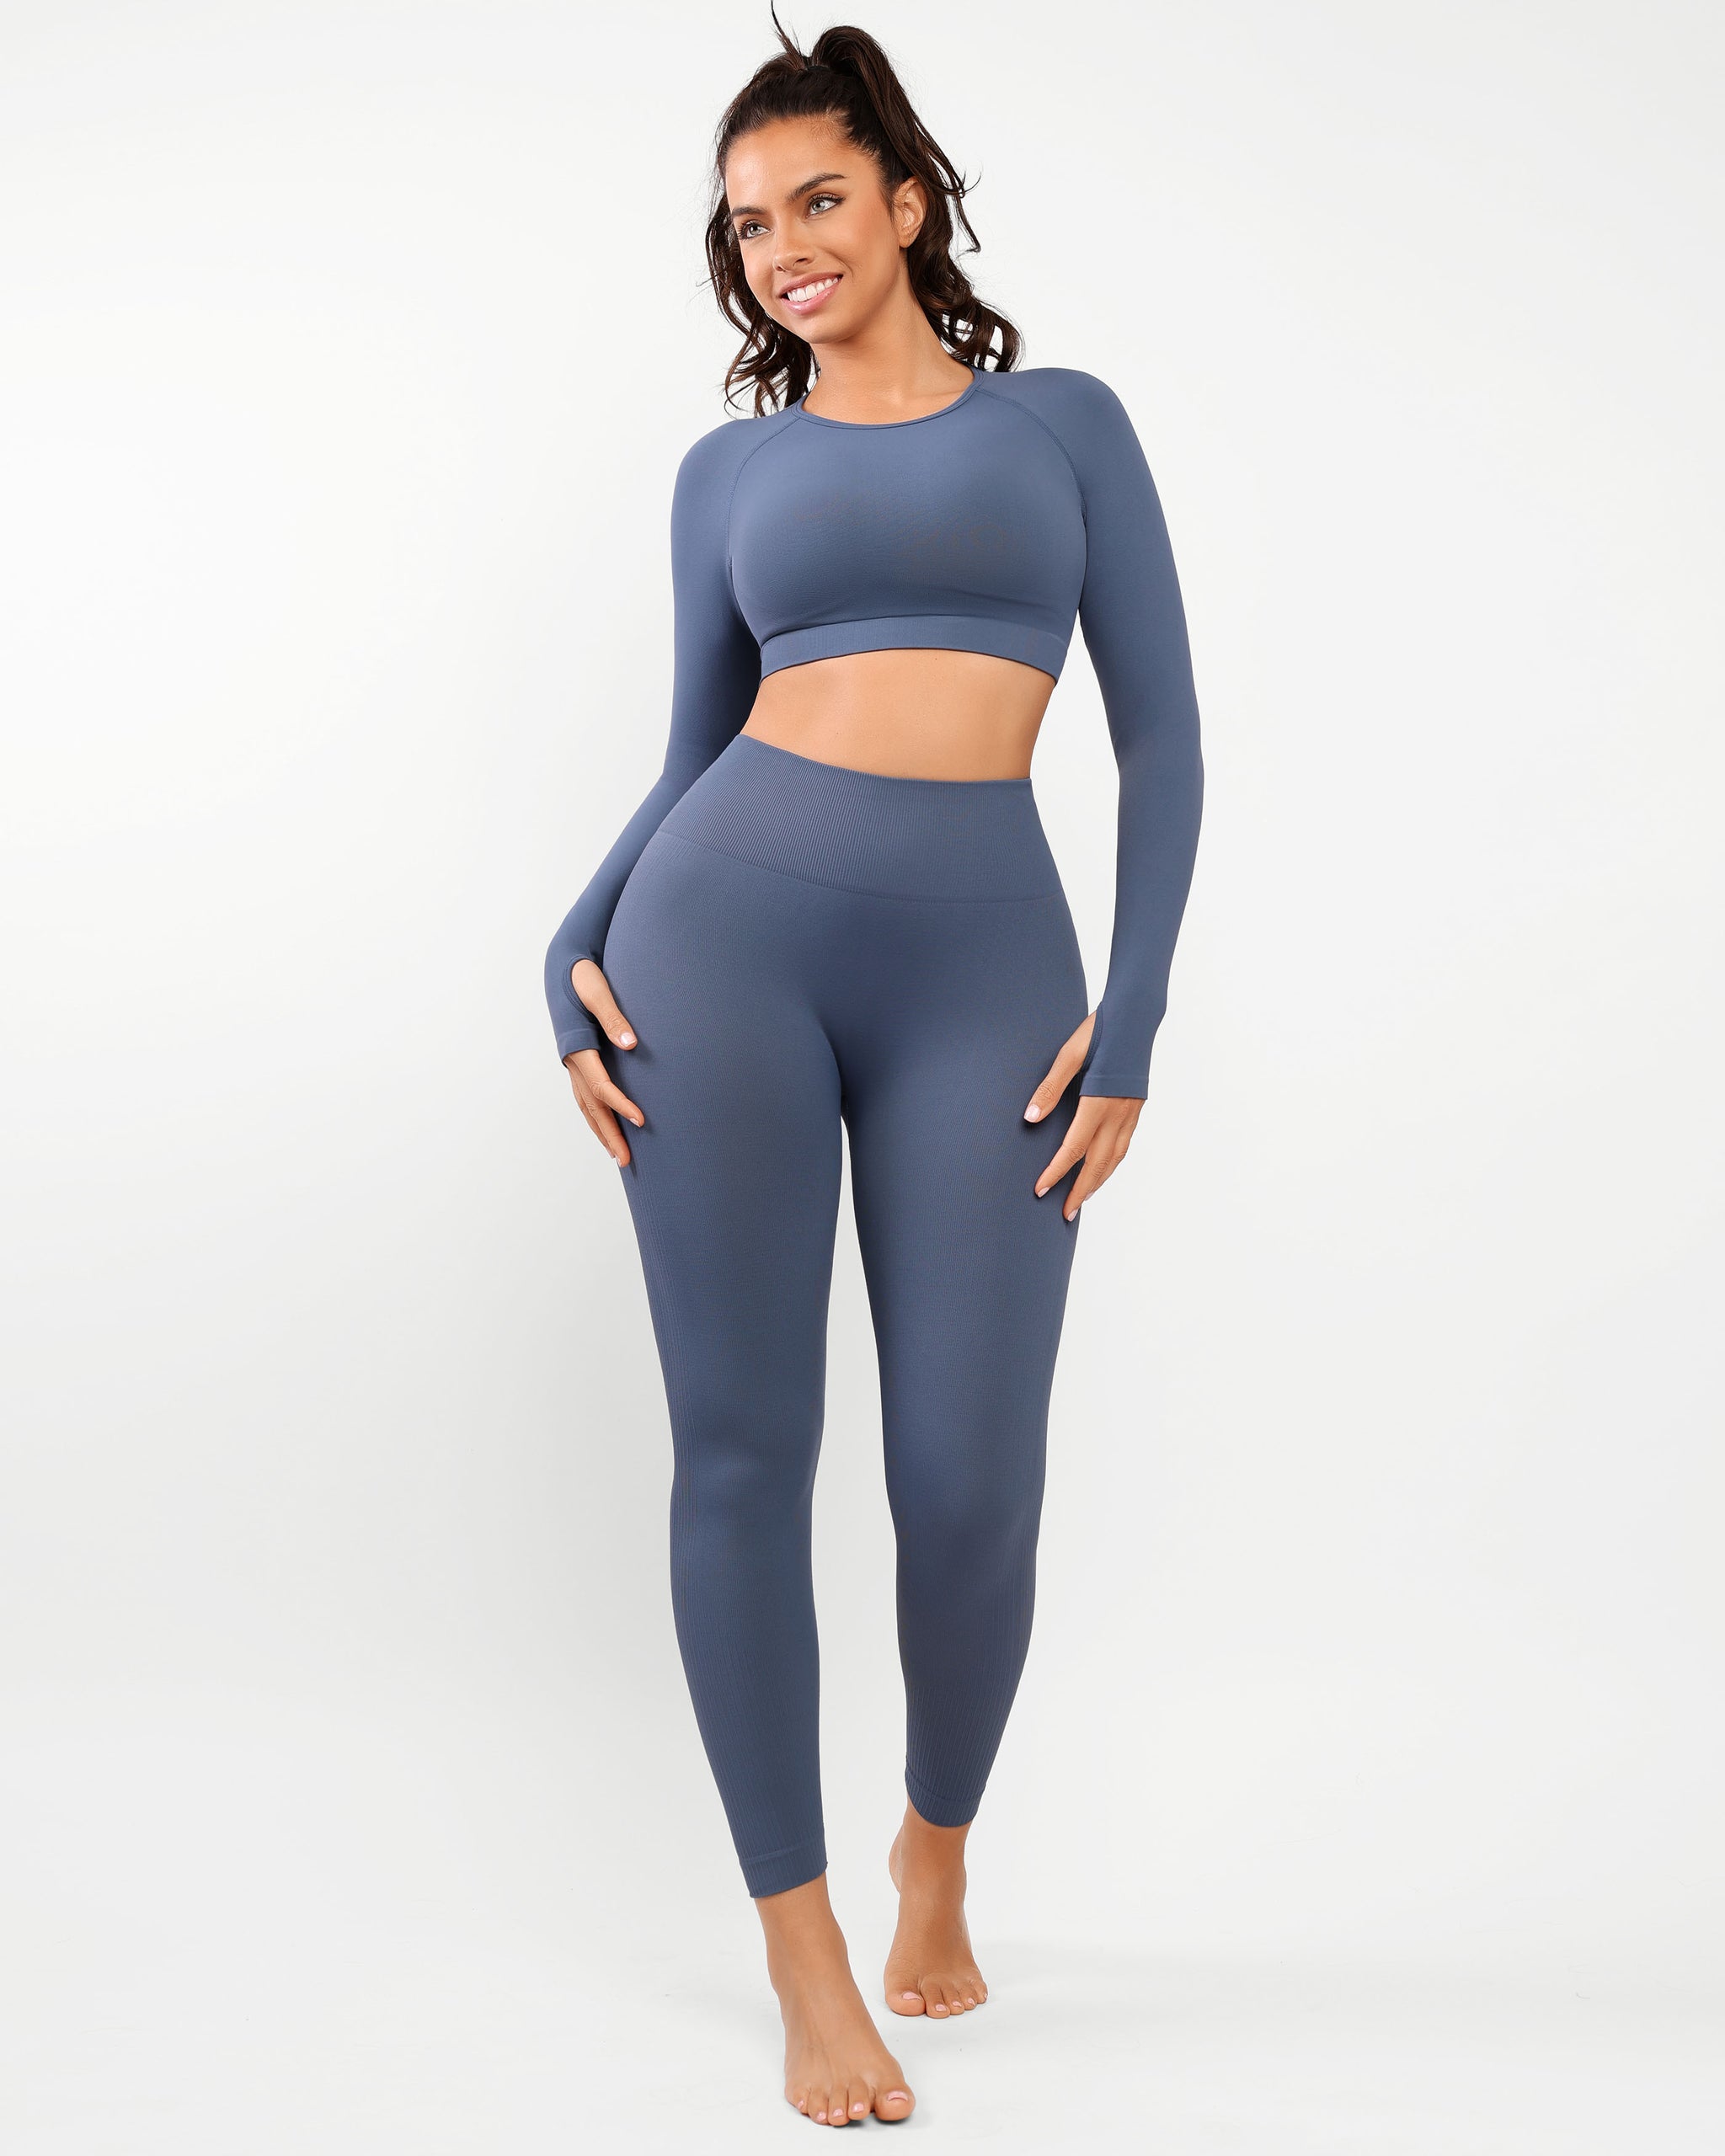 Thriftwithkellyann - Climawear athletic leggings. Size XL but work best for  a 6/8 IMO. Super stretchy, high waisted, nice thick material so no underwear  lines. Well made. These retail for $58. In